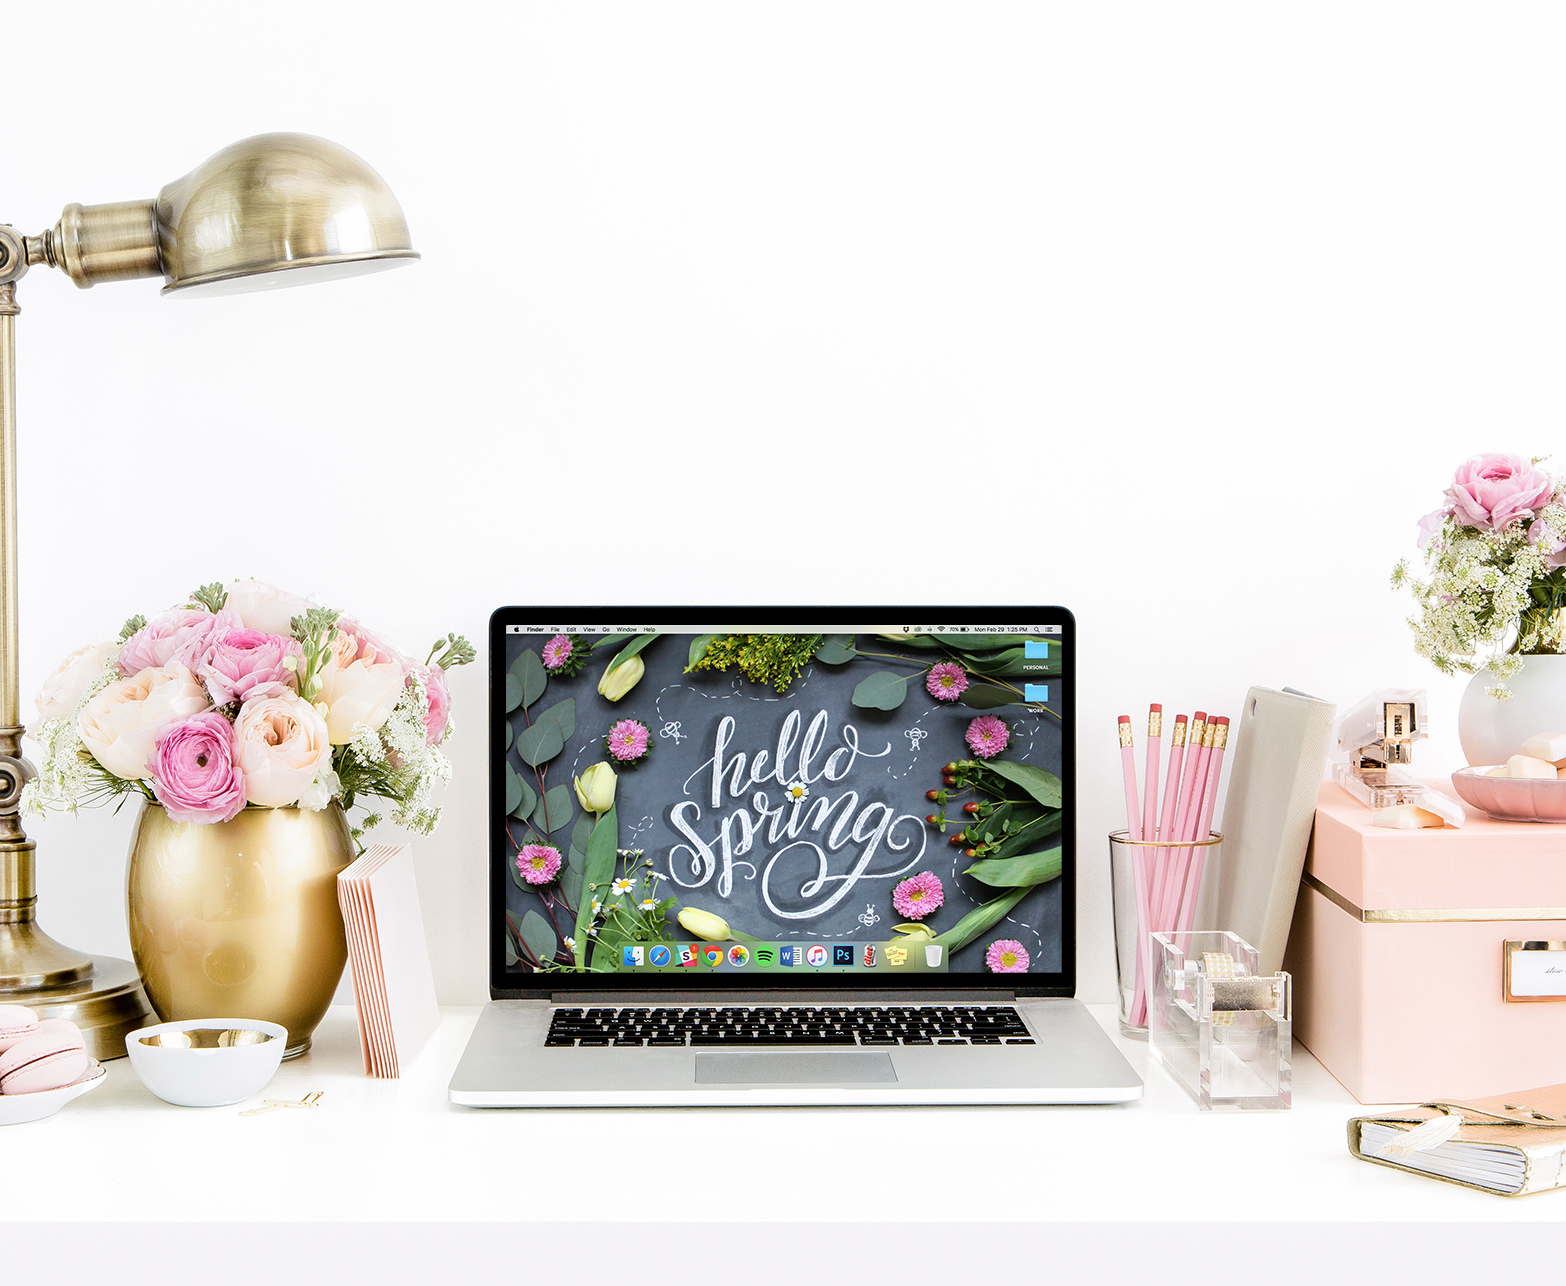 Update your computer background for Spring! Free downloads on Lily & Val Living!